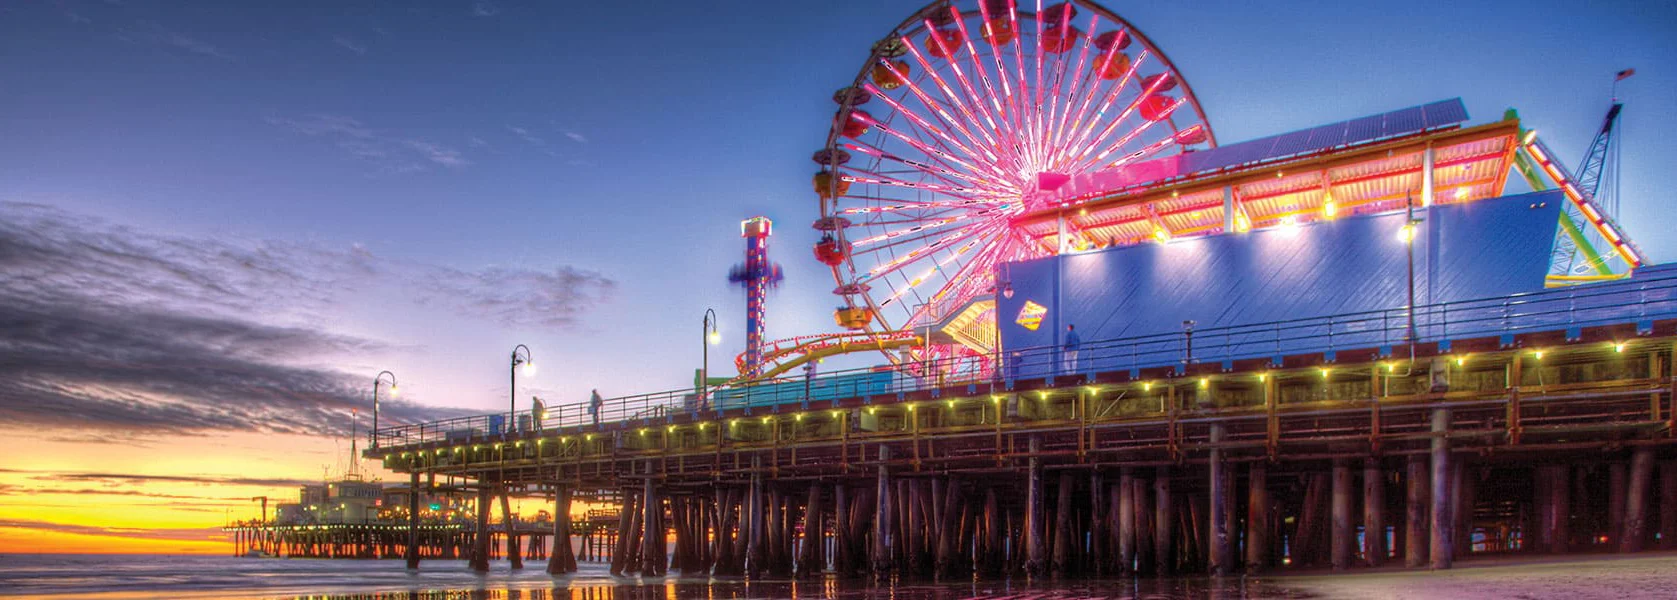 Photo by Chris Boehm of the pier and ferris wheel